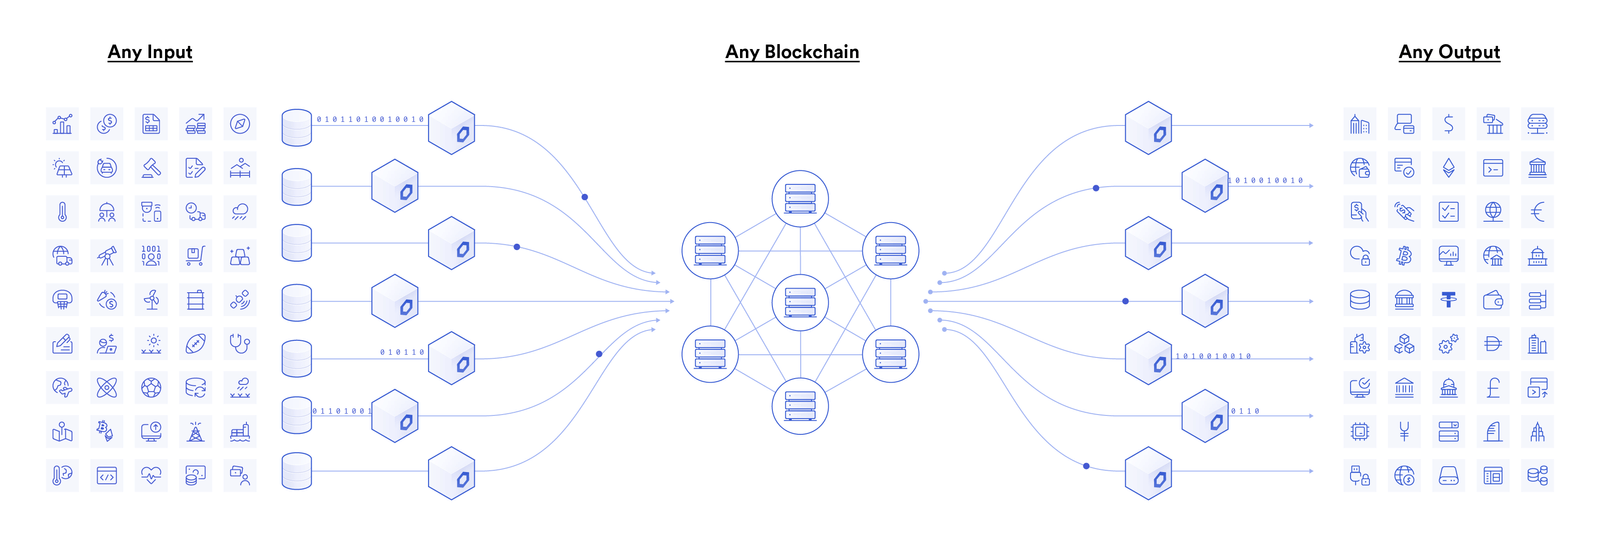 Chainlink connects any blockchain to any input and output